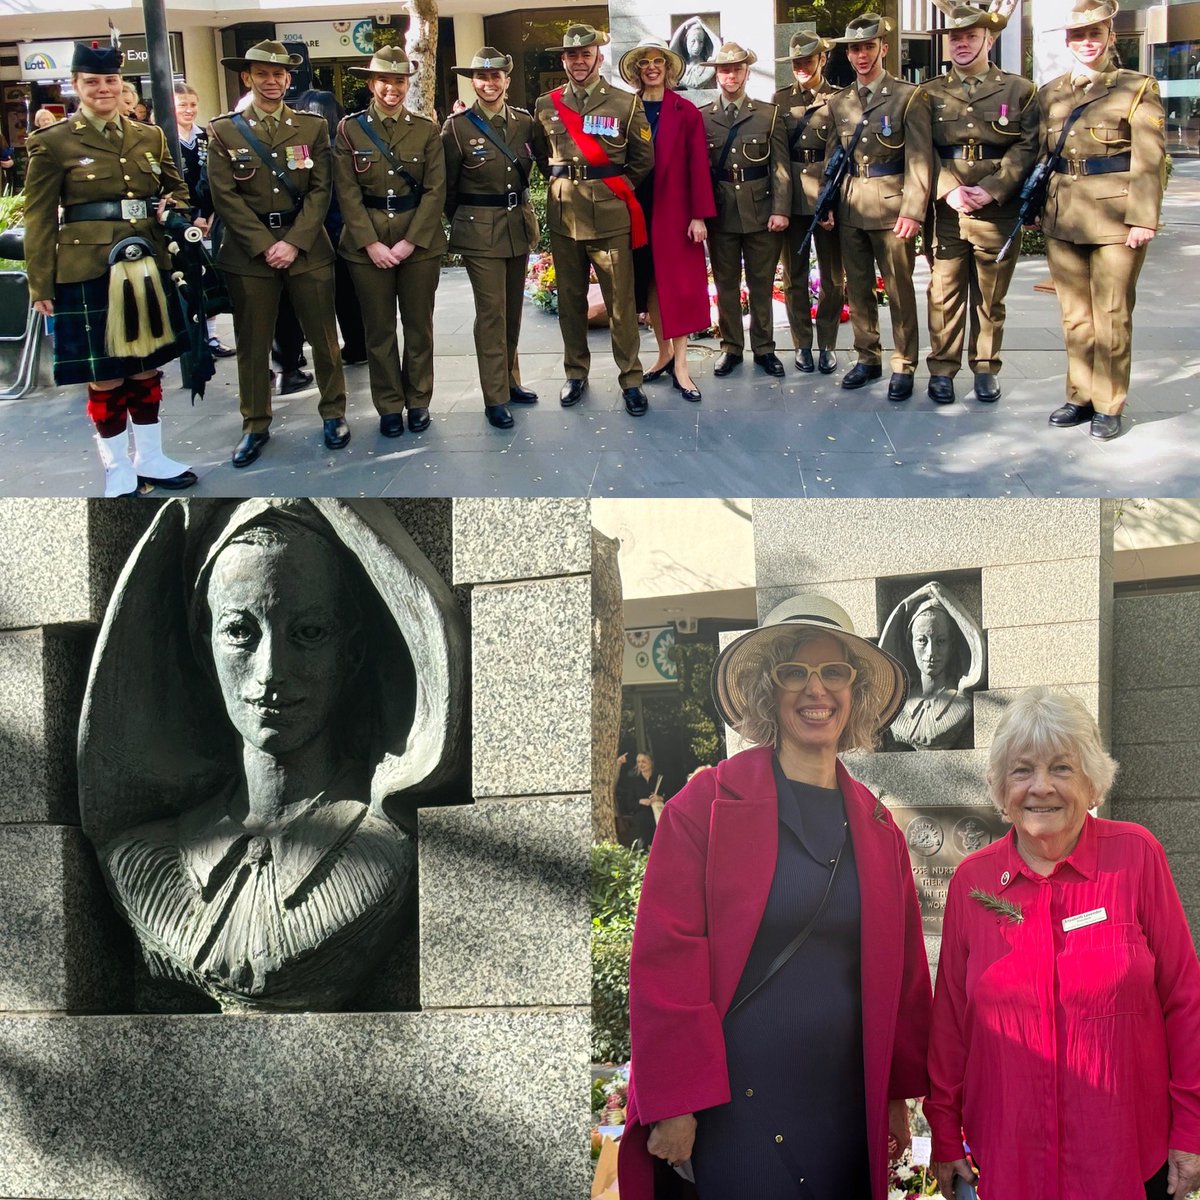 The Australian Nurses Memorial Centre commemorative service is a tribute held to remember all nurses past and present, and to honour those who have given their lives in service of their country. A pleasure to represent @NatalieSuleyman #LestWeForget #springst @anmfvic